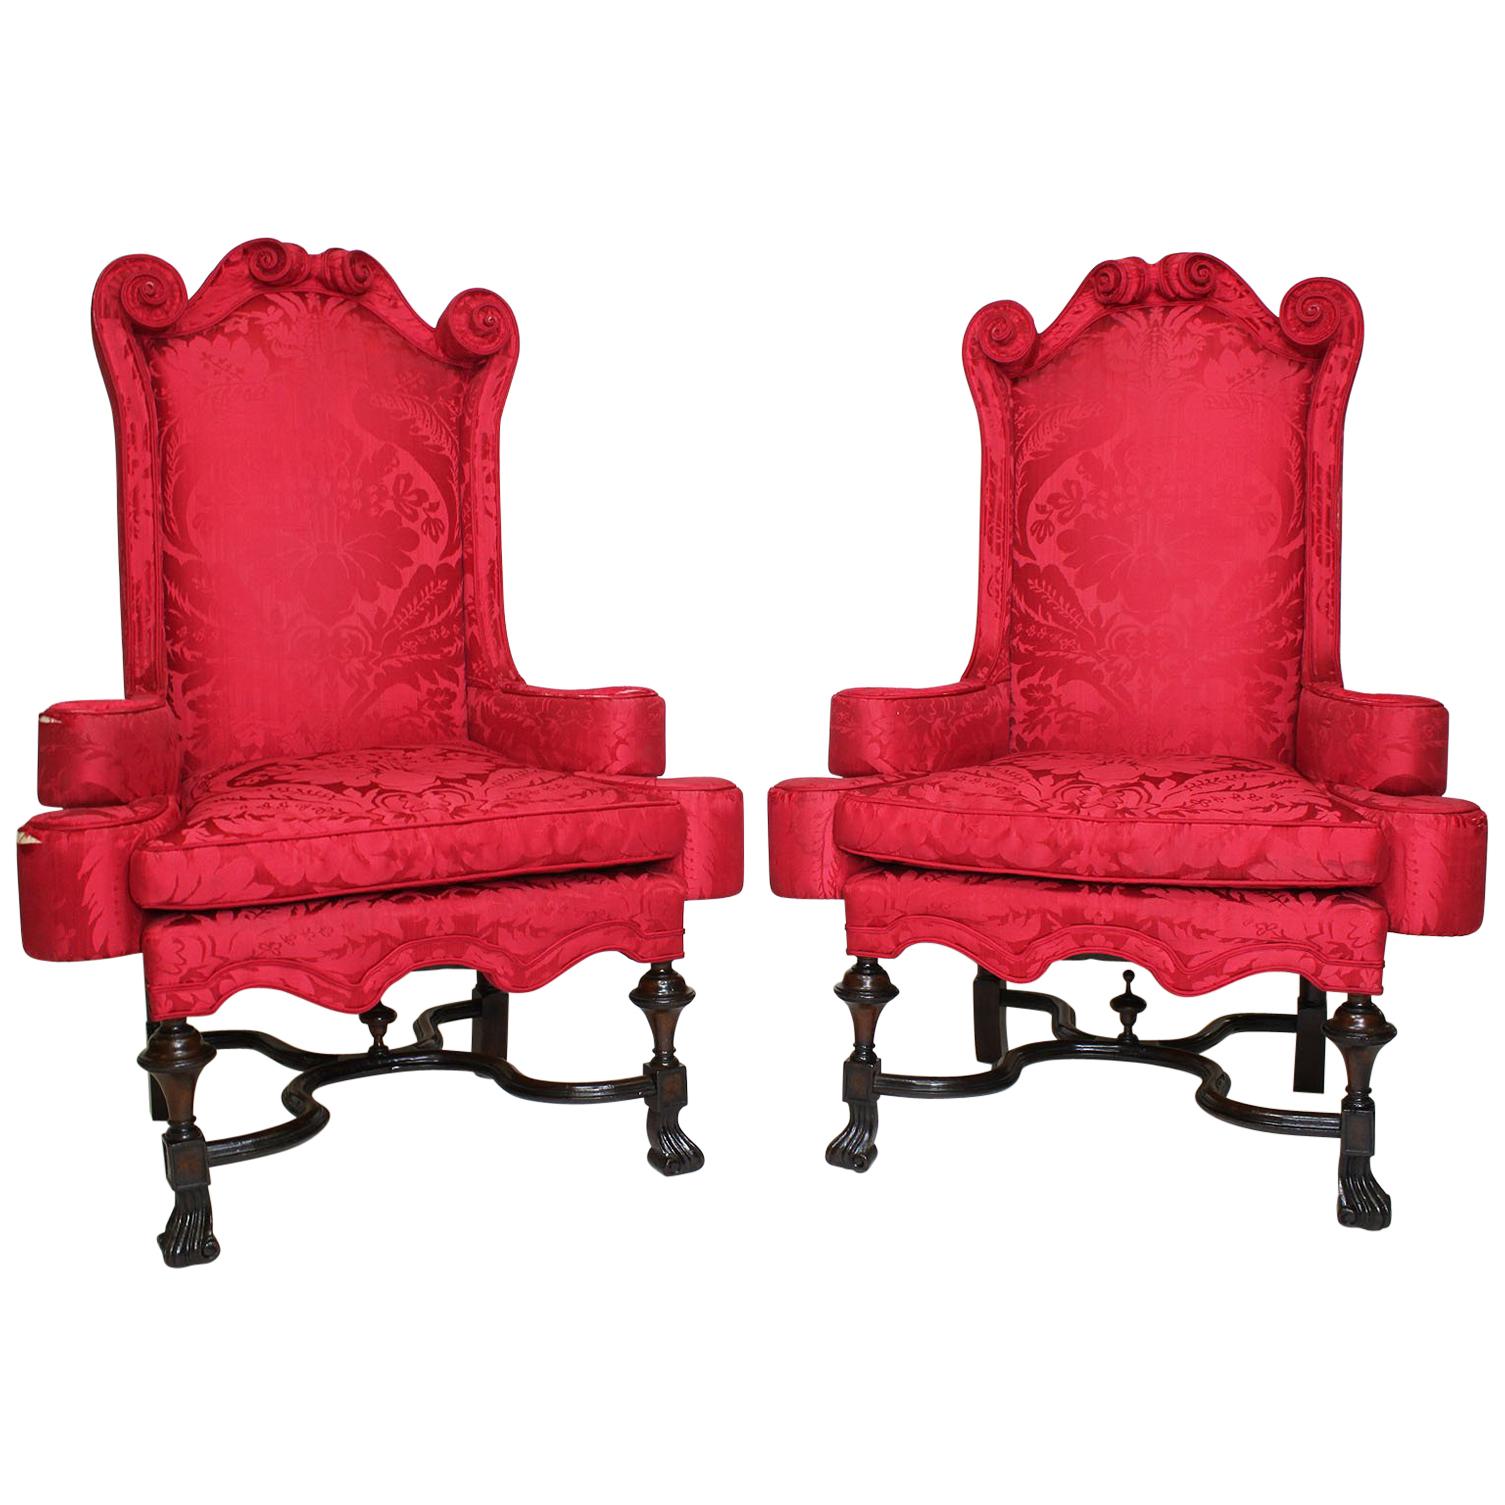 Rare Pair of English 19th Century William & Mary Style Mahogany Throne Armchairs For Sale